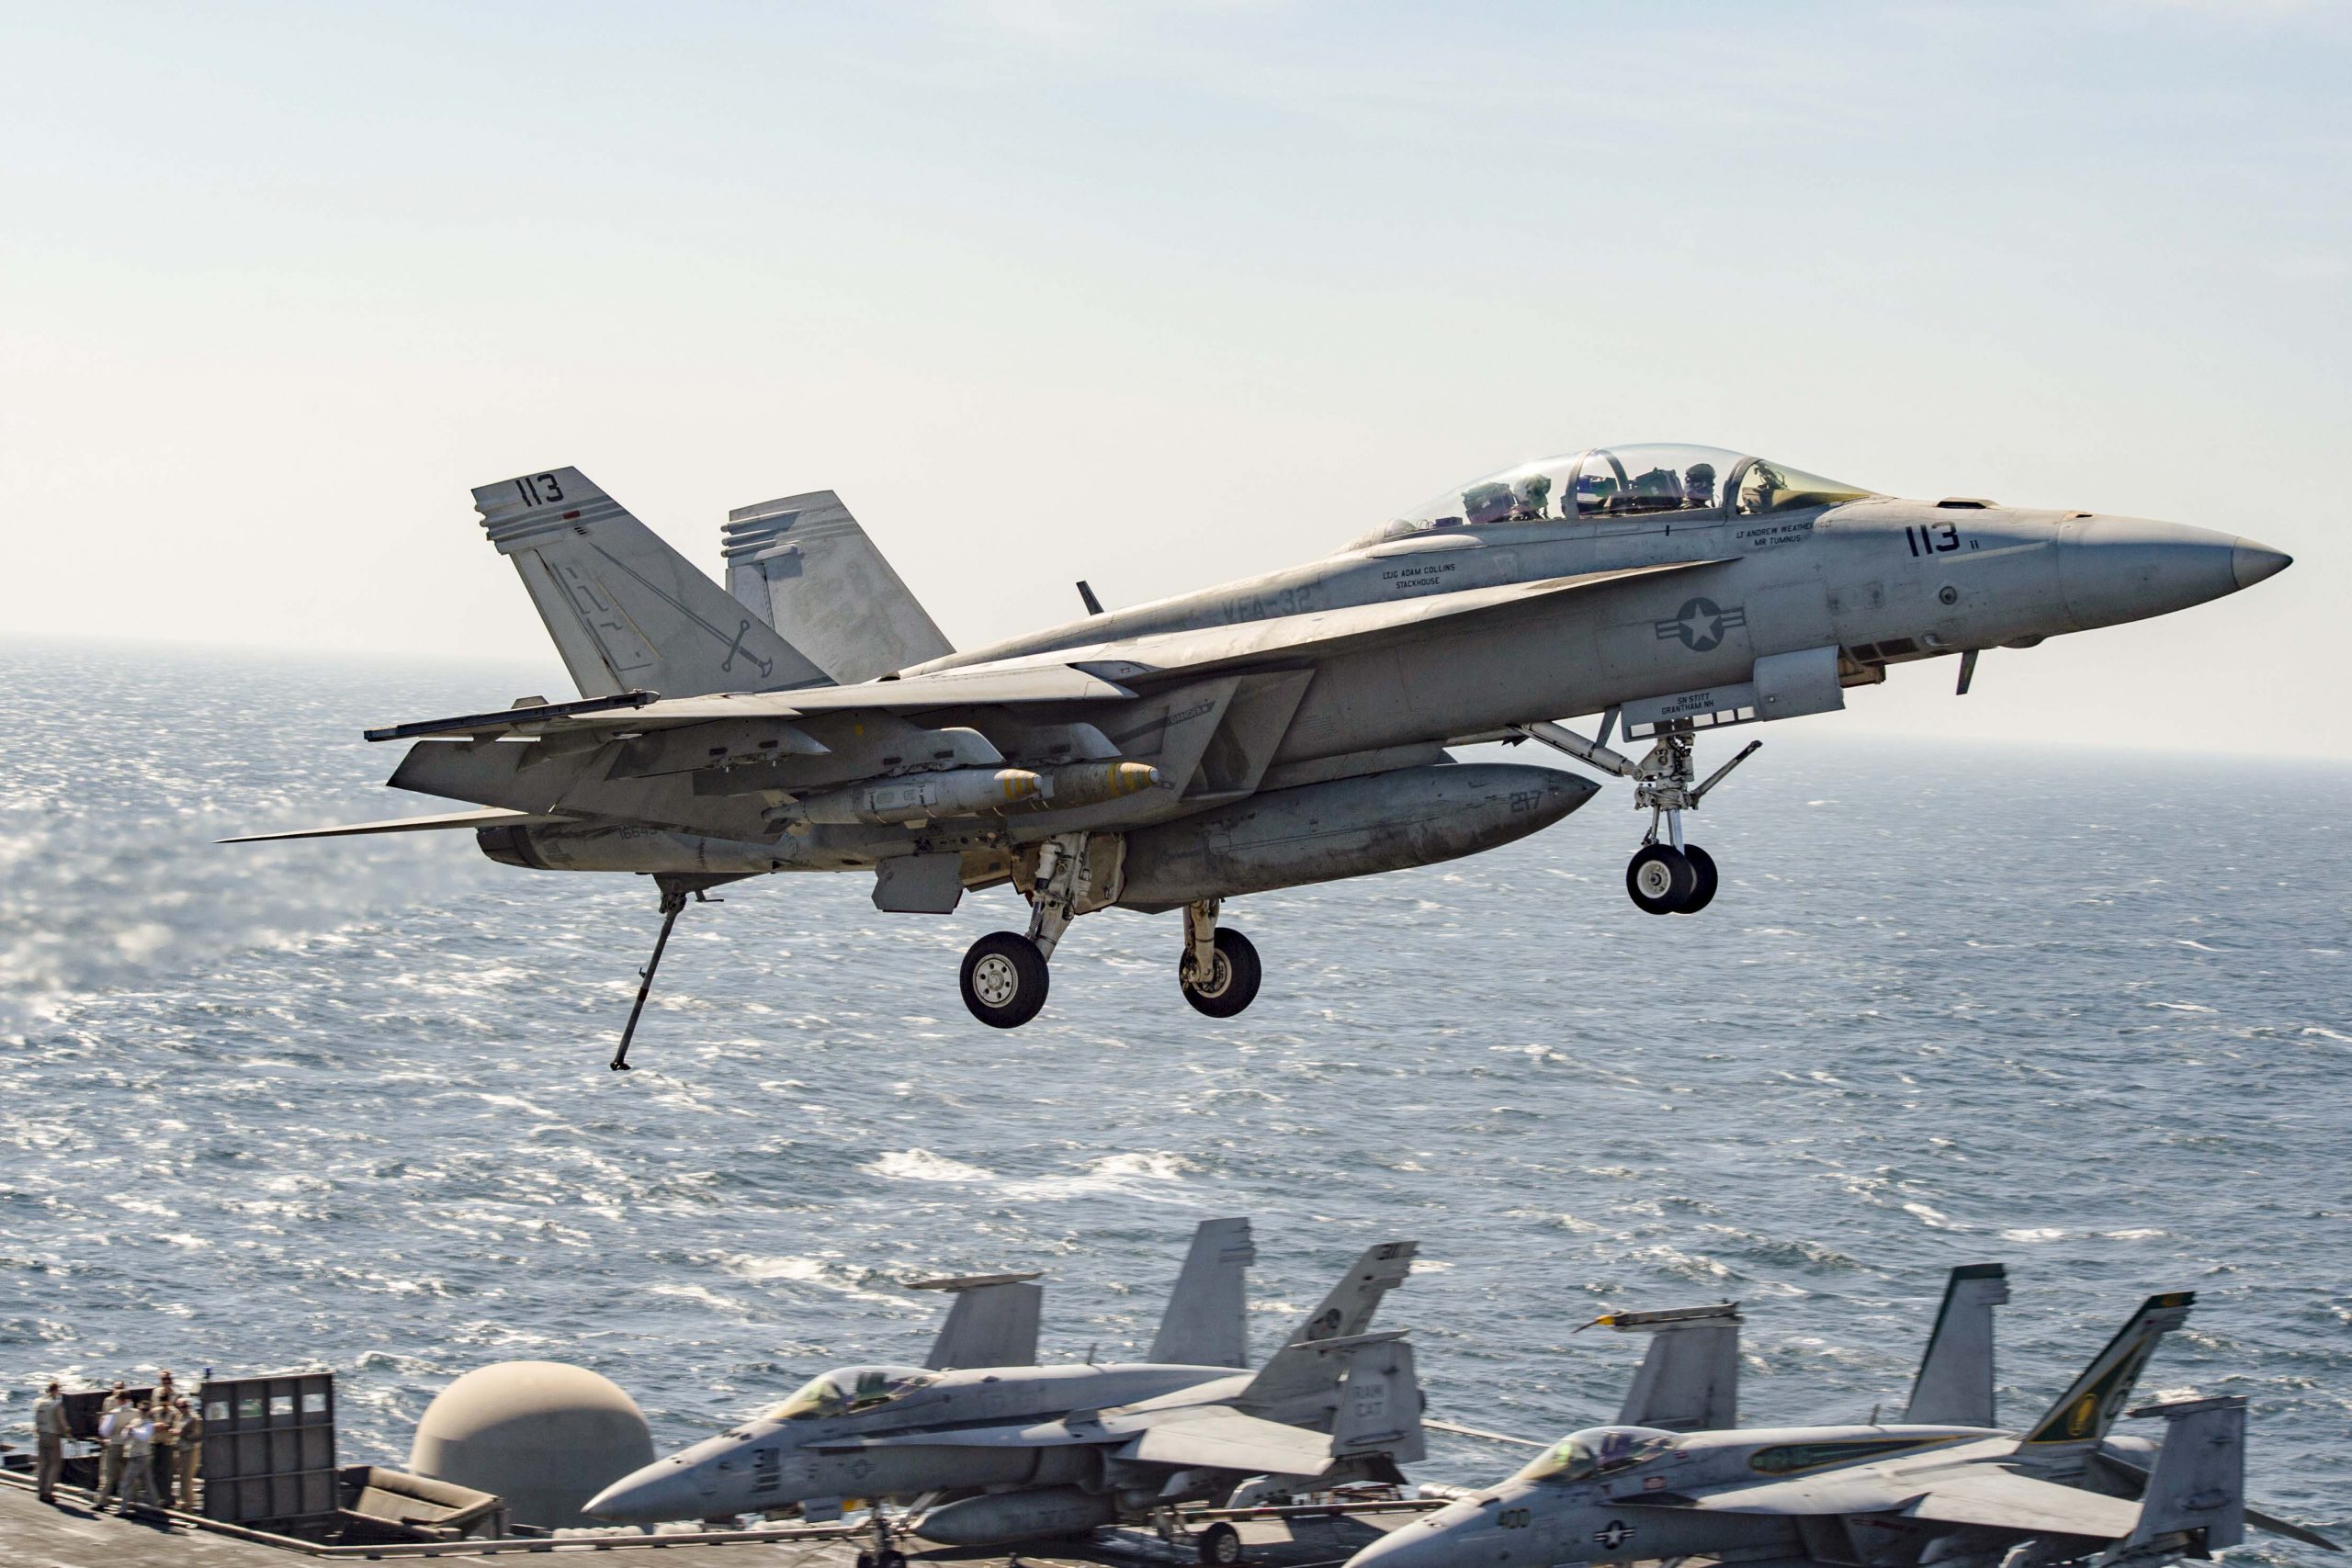 An F/A-18-F Super Hornet assigned to the Fighting Swordsmen of Strike Fighter Squadron 32 flies across the flight deck of the aircraft carrier USS Dwight D. Eisenhower in the Arabian Gulf, Nov. 10, 2016. The Eisenhower and its carrier strike group are deployed in support of Operation Inherent Resolve, maritime security operations and theater security cooperation efforts in the U.S. 5th Fleet area of operations. OIR’s mission to counter the Islamic State of Iraq and the Levant is one of the Defense Department’s five evolving challenges, as discussed in a House Permanent Select Committee on Intelligence hearing with DoD and intelligence officials, Nov. 17, 2016. Navy photo by Petty Officer 3rd Class Nathan T. Beard. -